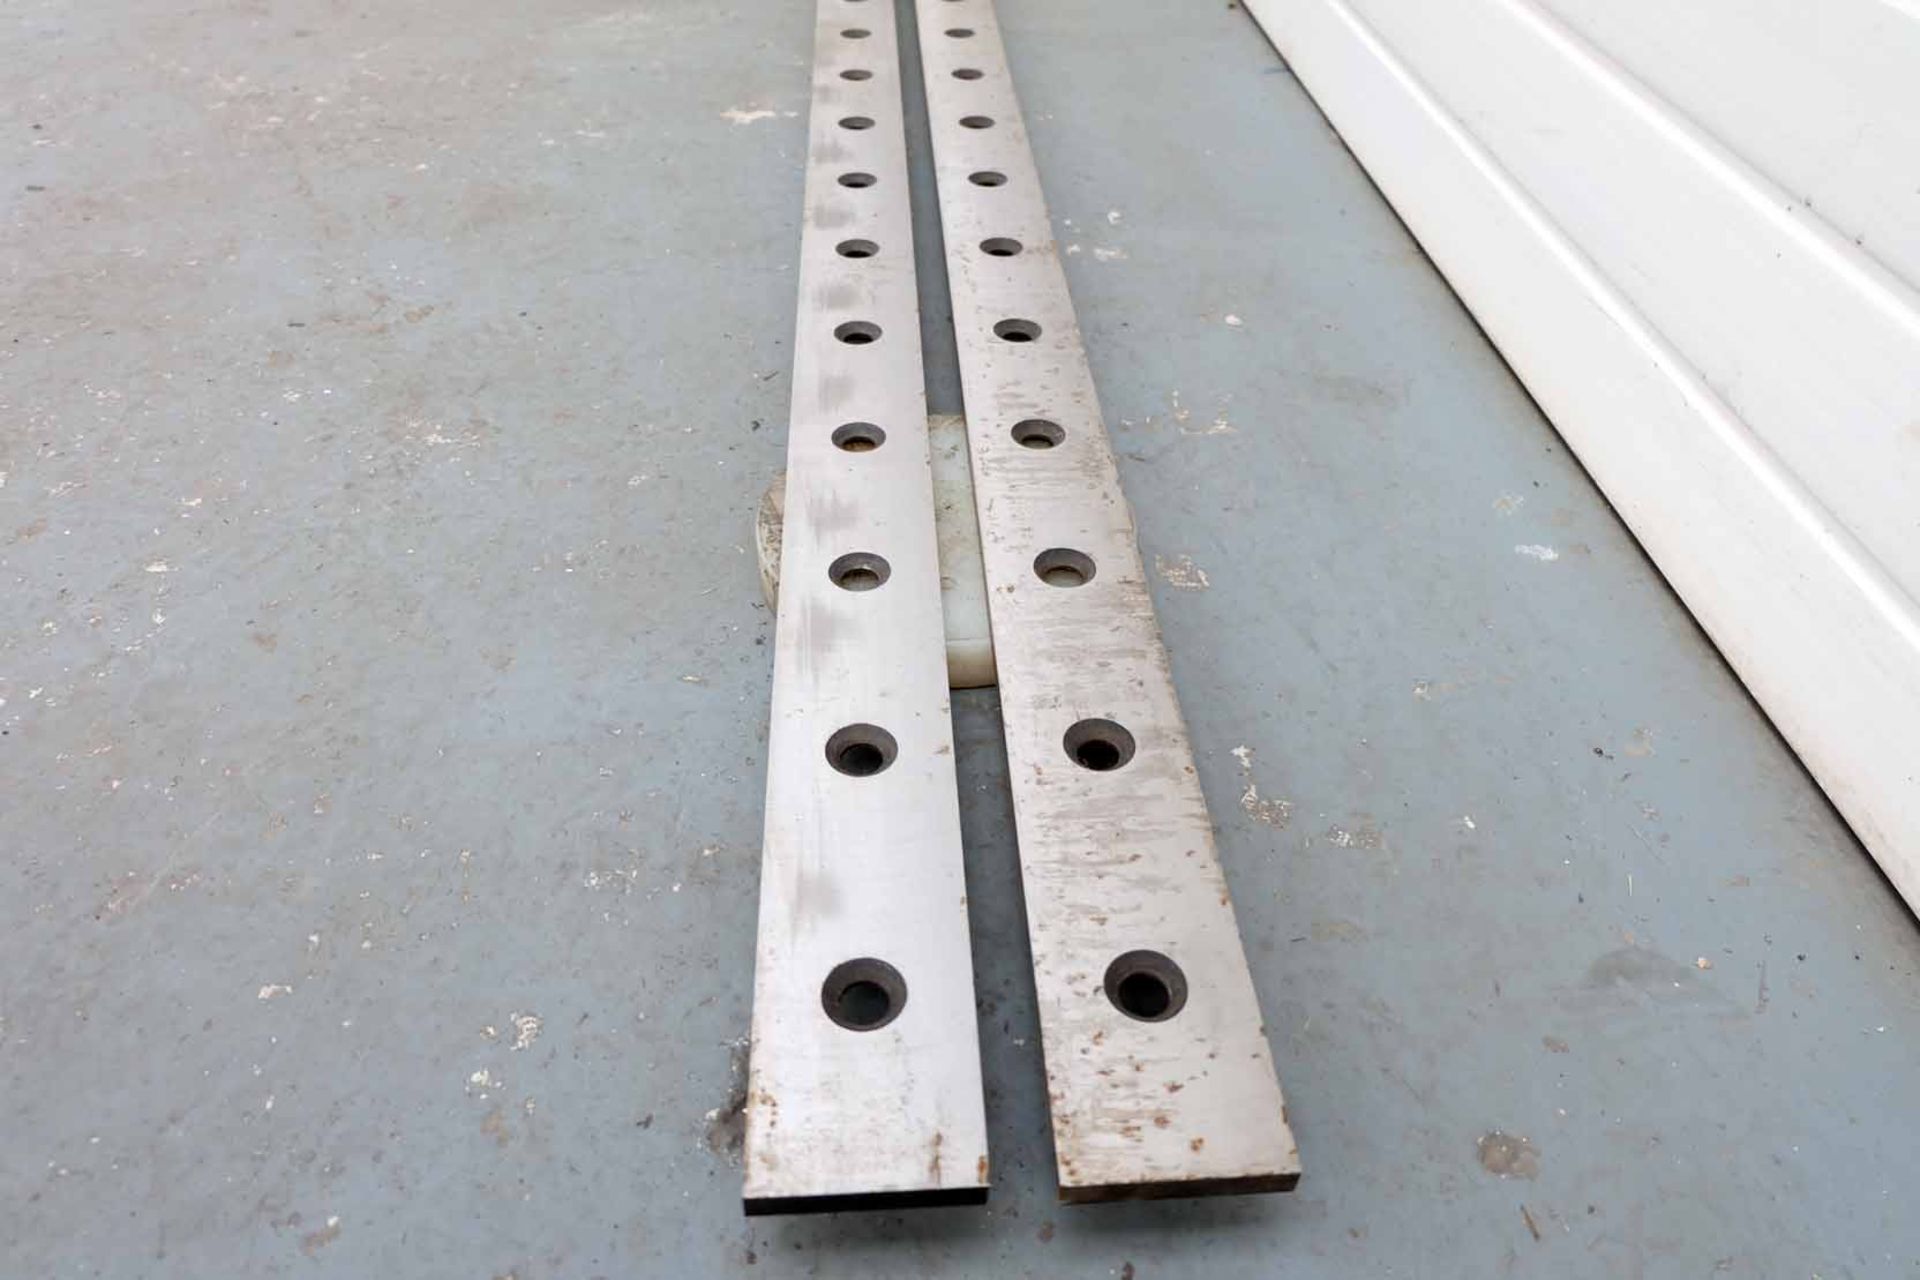 Pair of Guillotine Blades. Length 1855mm. Dimensions 75mm x 13mm. Double Sided. 16 Holes Counter Sun - Image 4 of 5